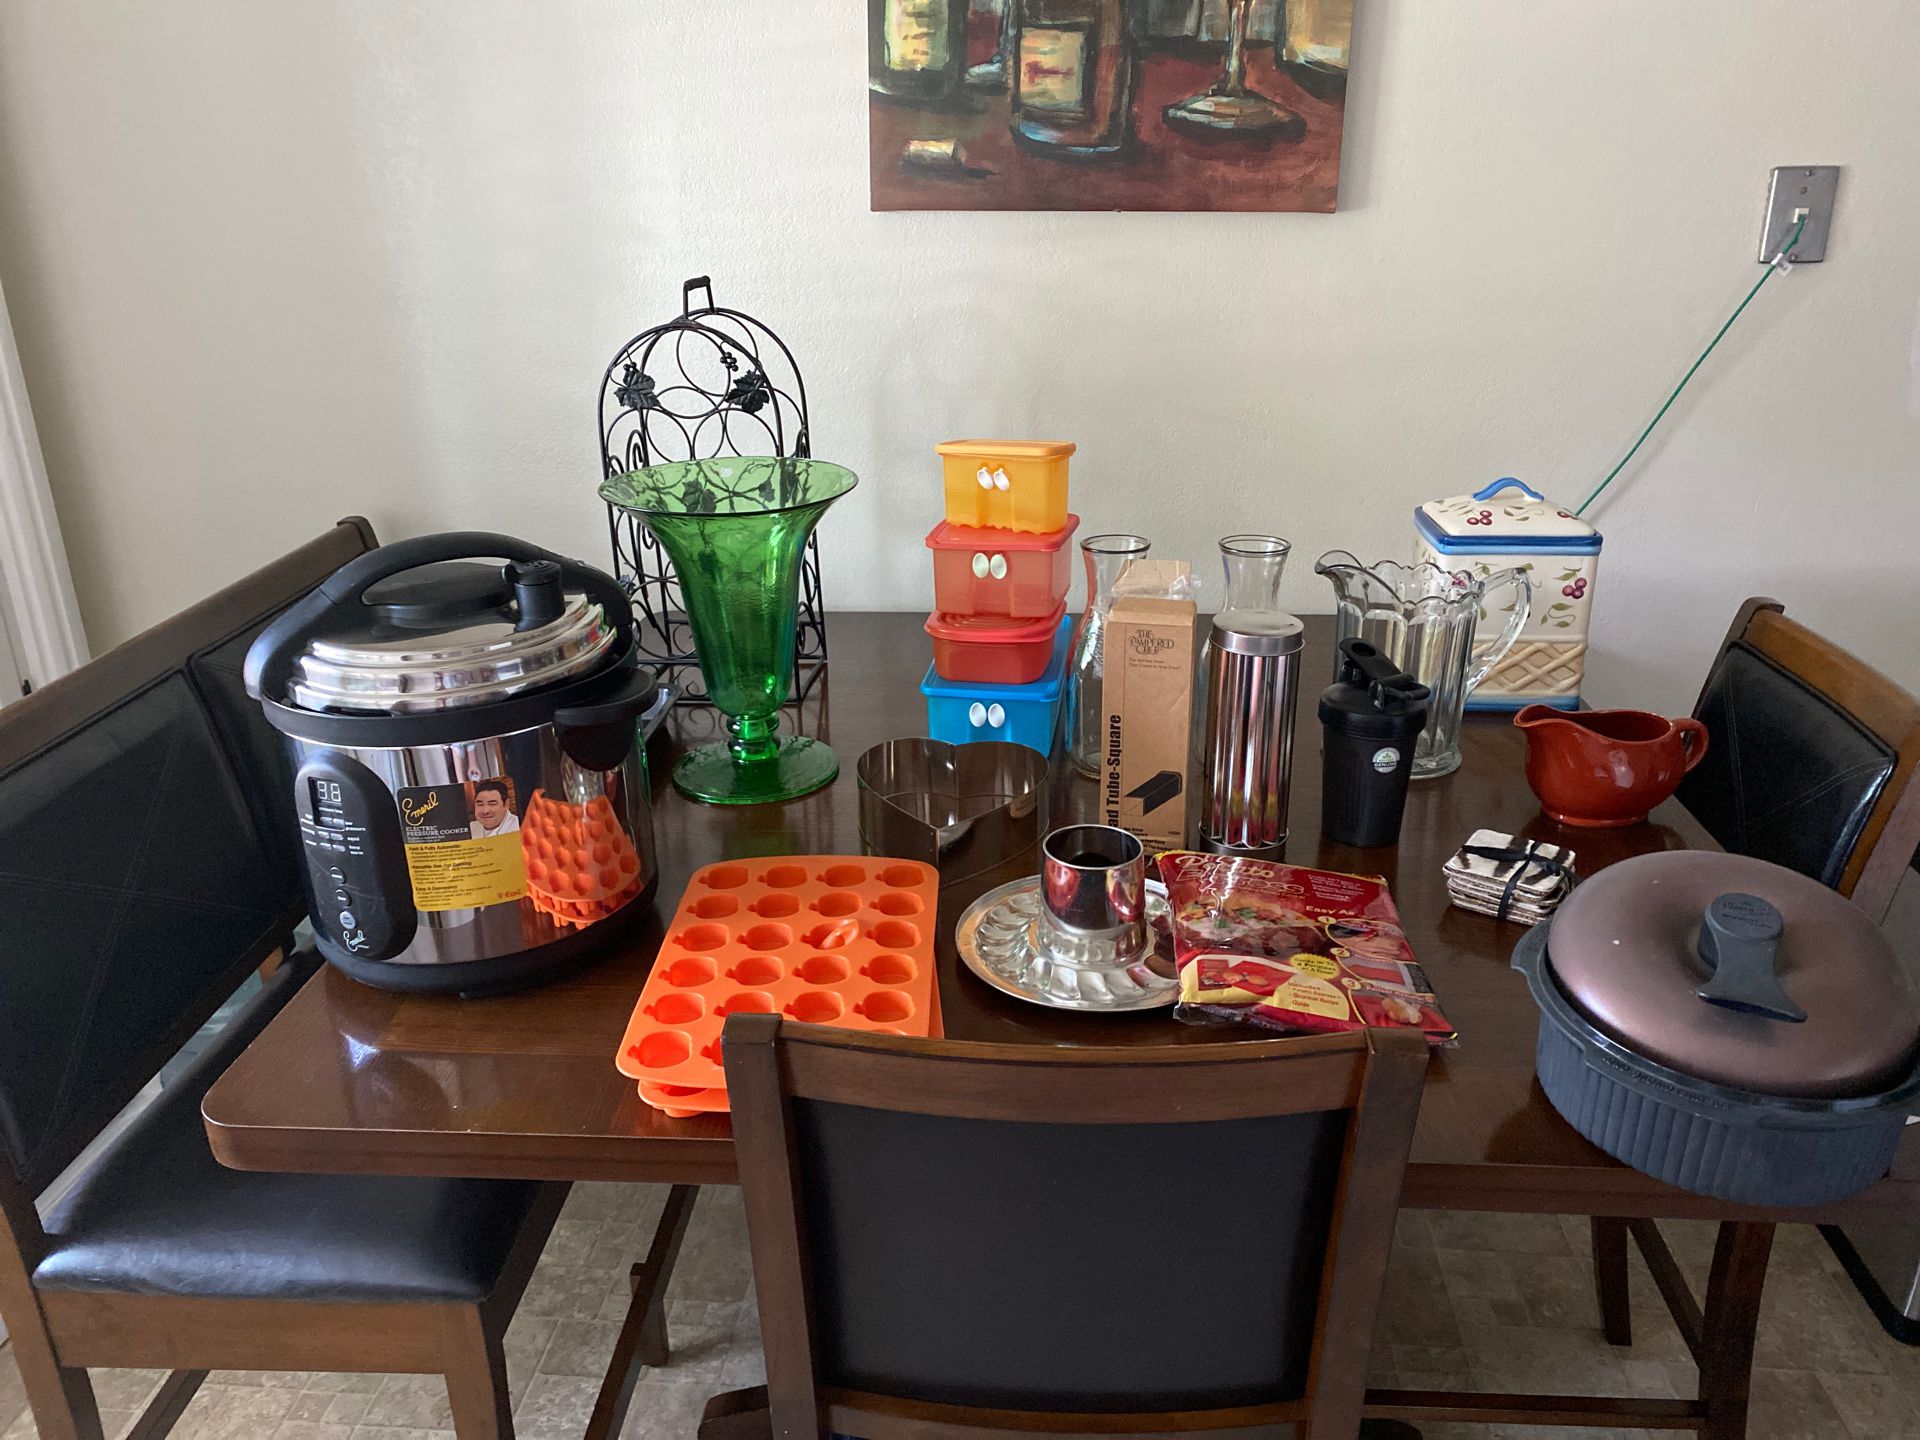 Kitchen items $25 for everything